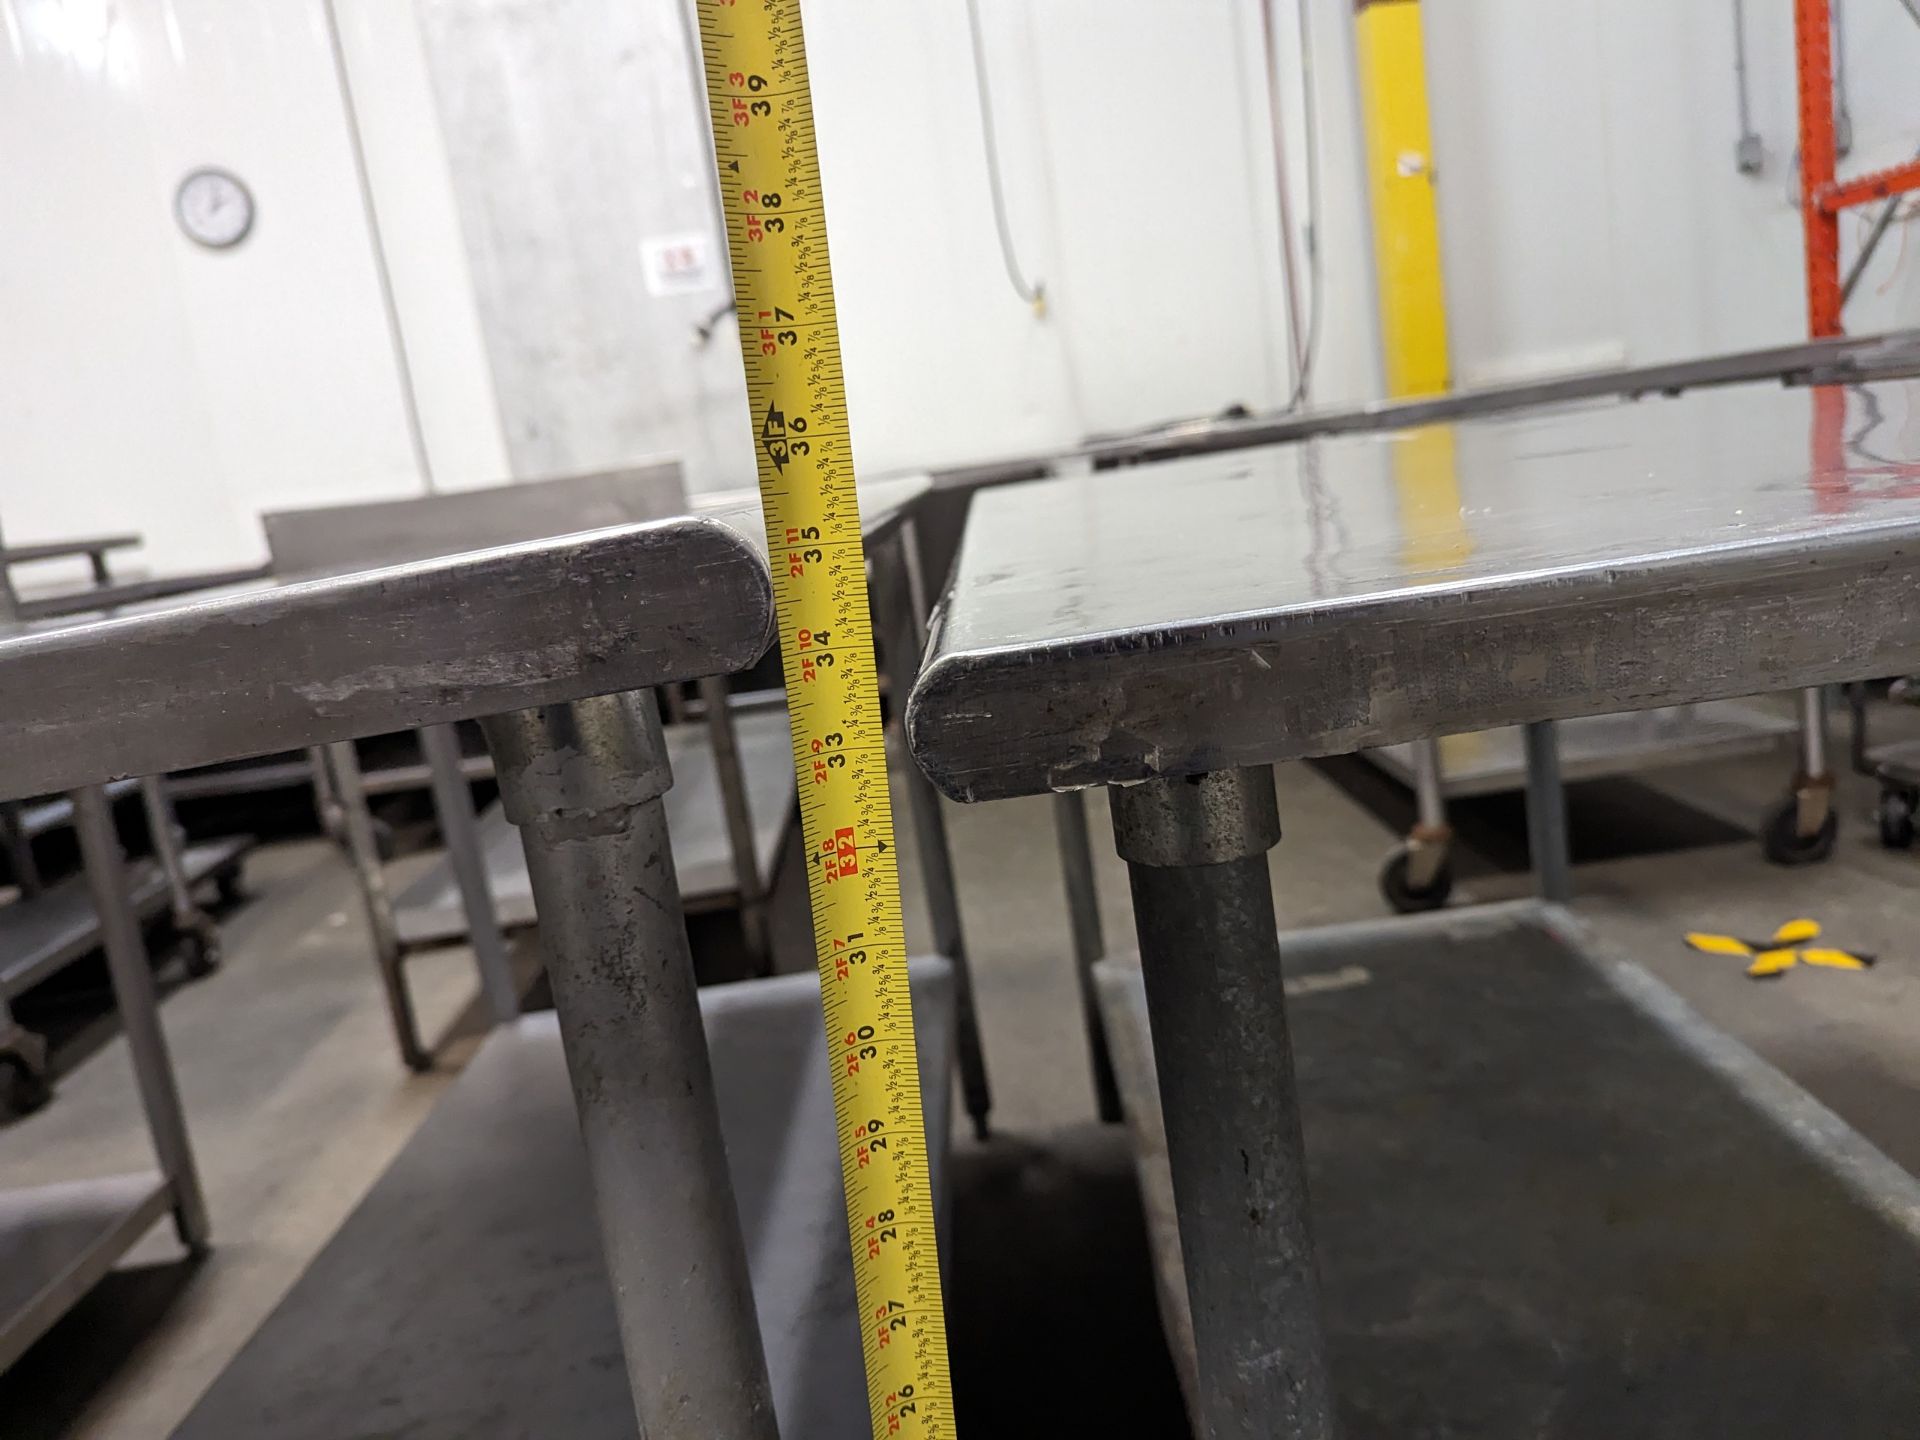 Lot of 2 5ft Long SS Tables, Dimensions LxWxH: 60x30x35 each - Image 6 of 7